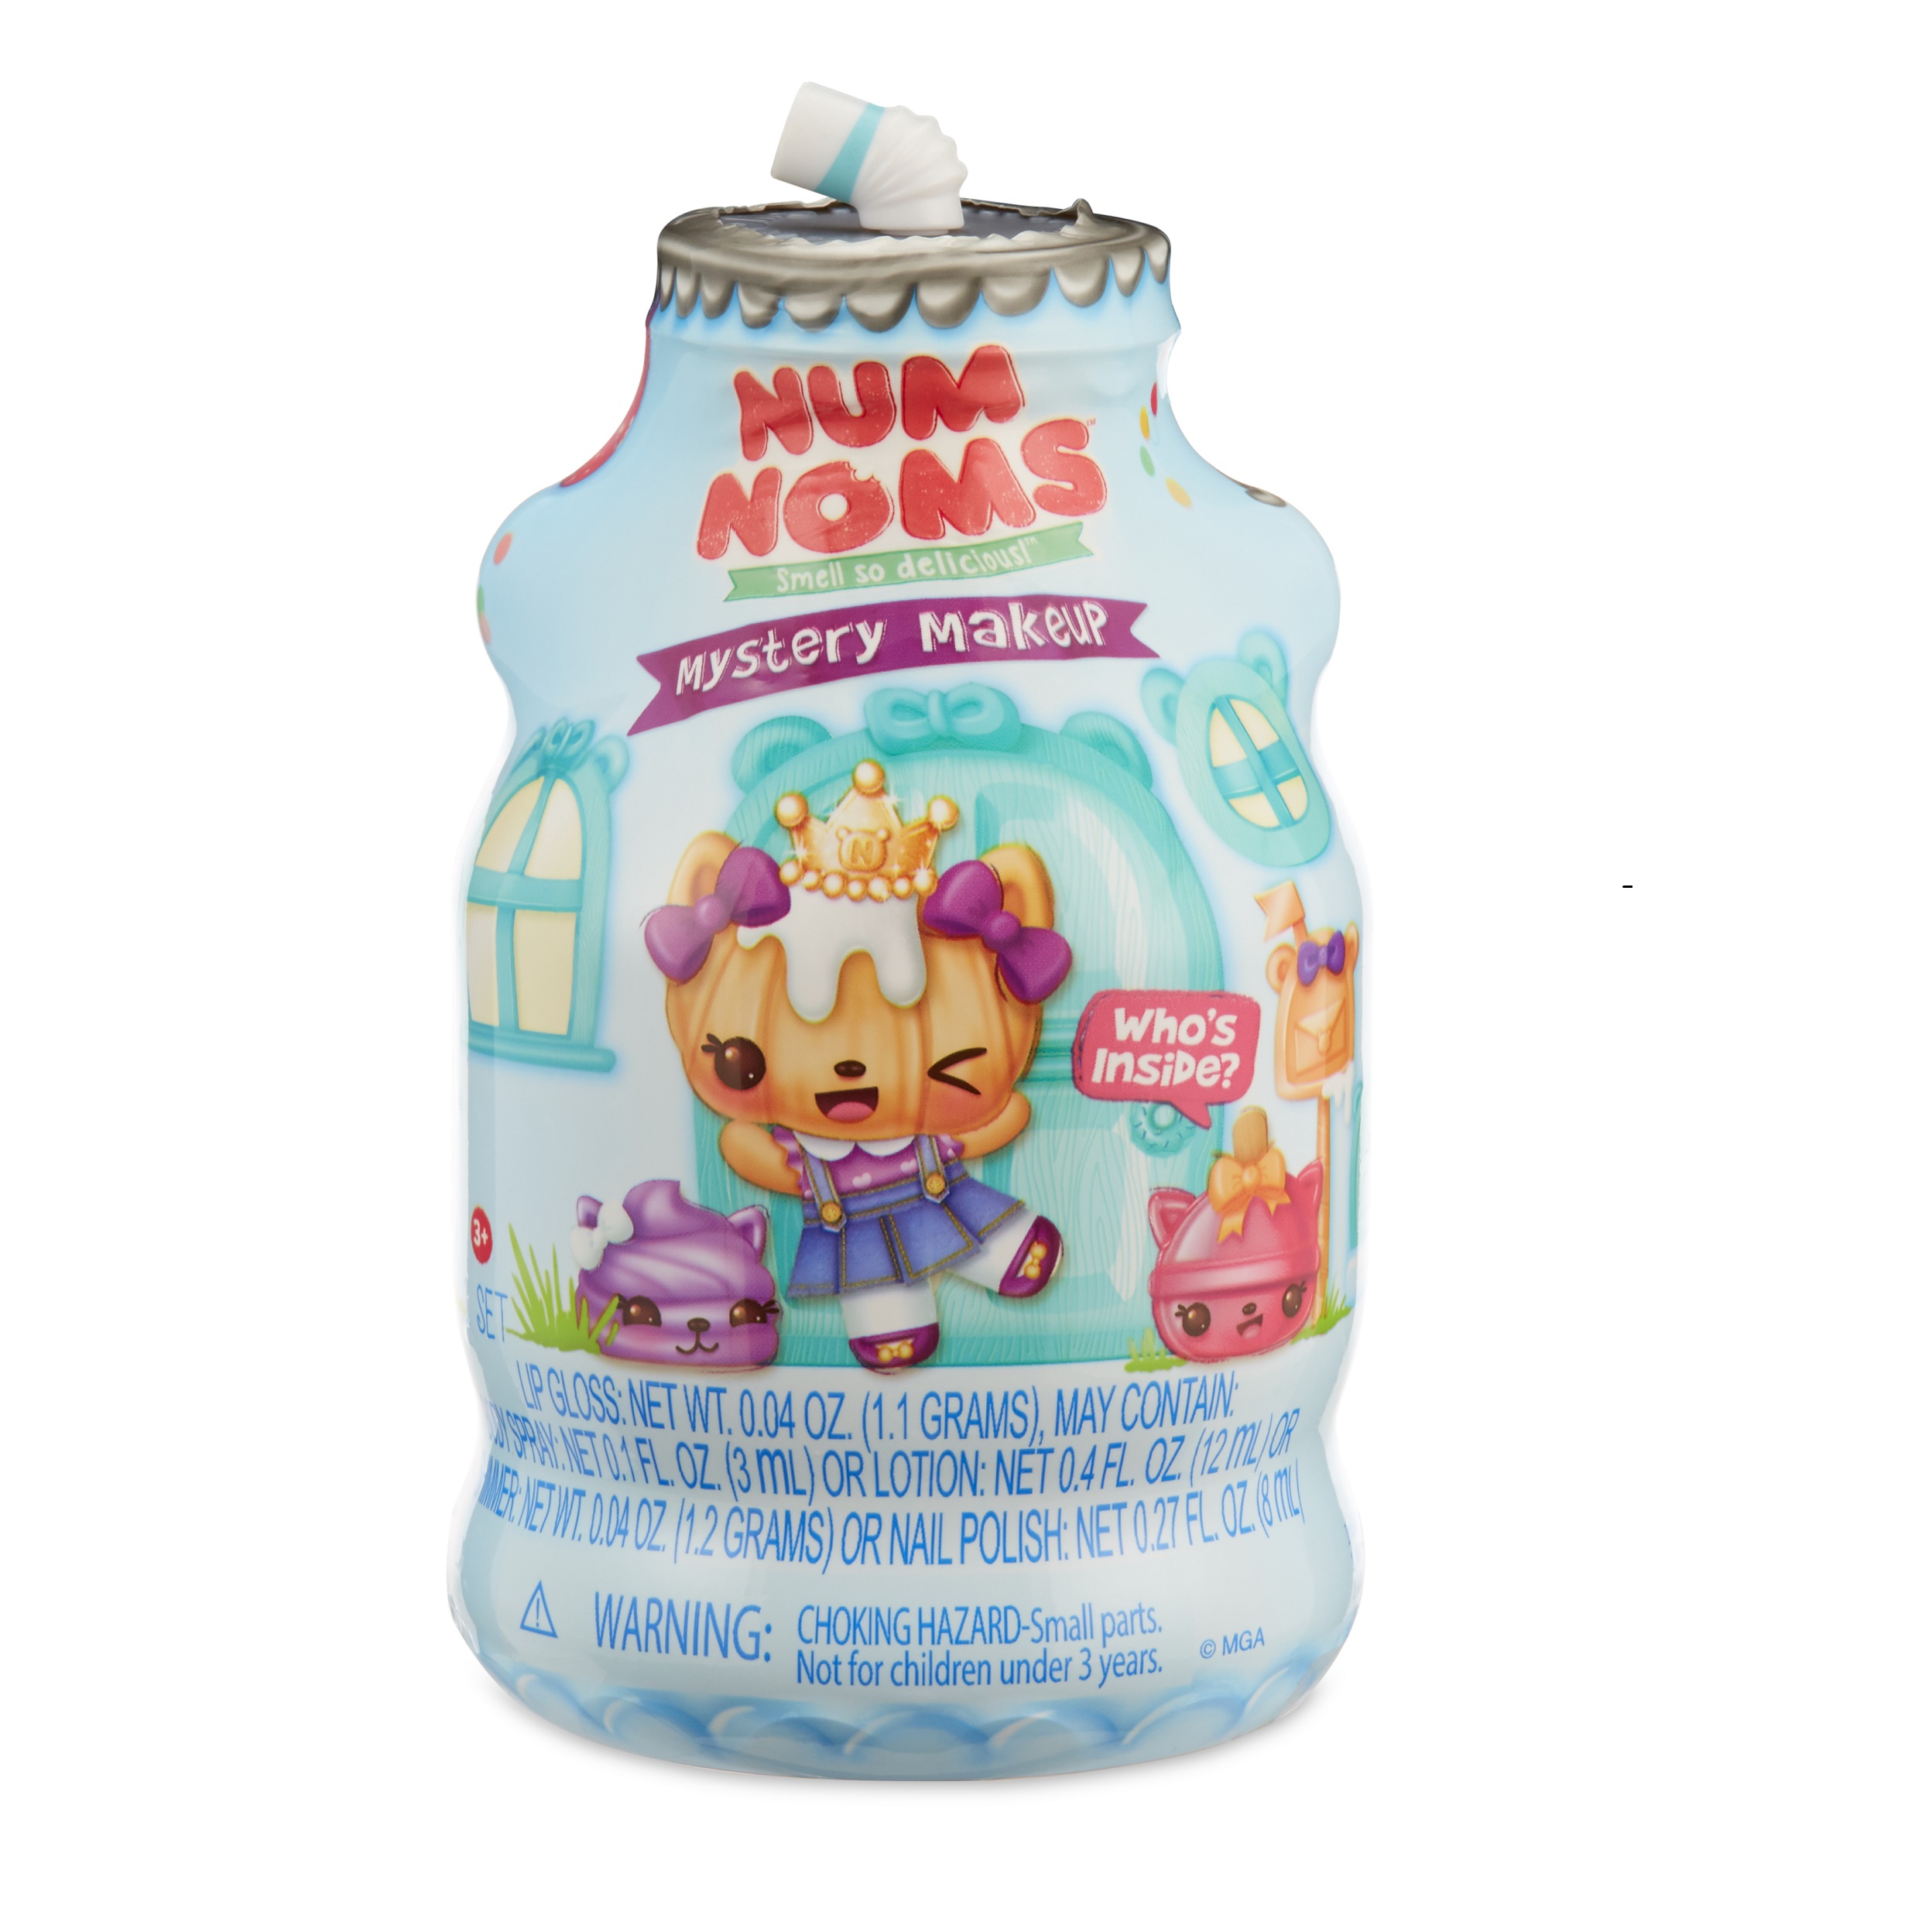 Num Noms Mystery Makeup with Hidden Cosmetics Inside Wave 2 - image 1 of 6